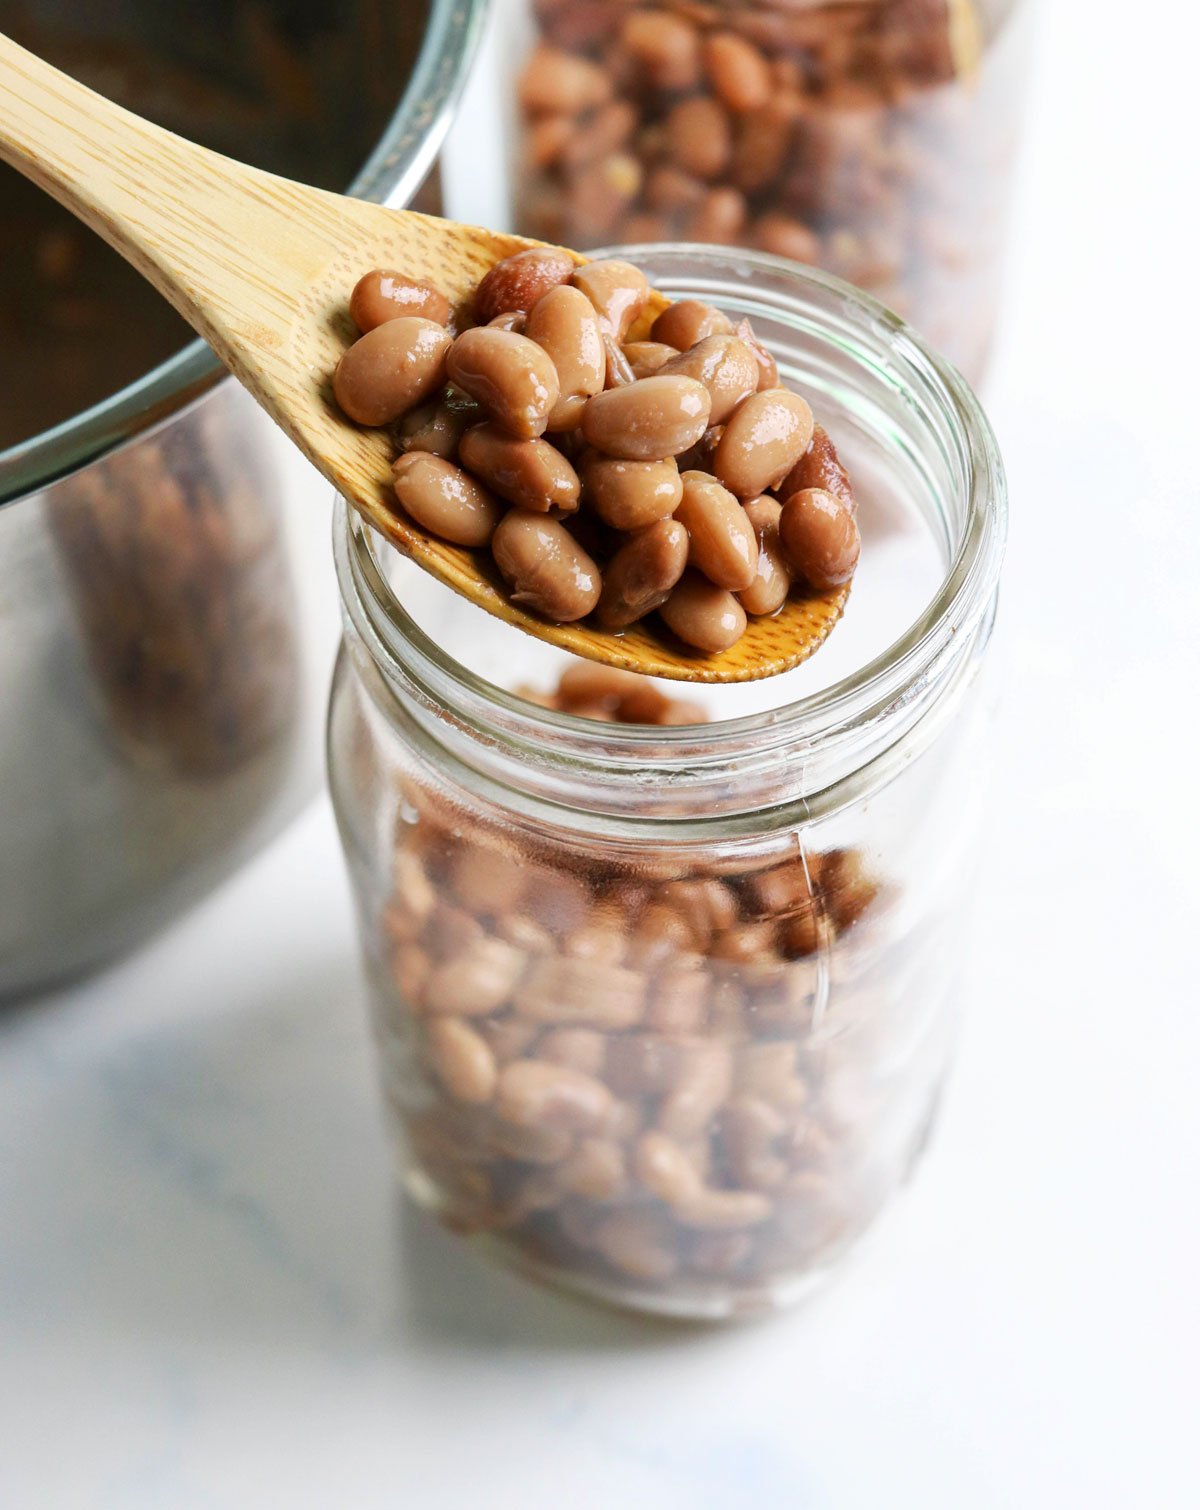 Pinto beans spooned into a glass jar